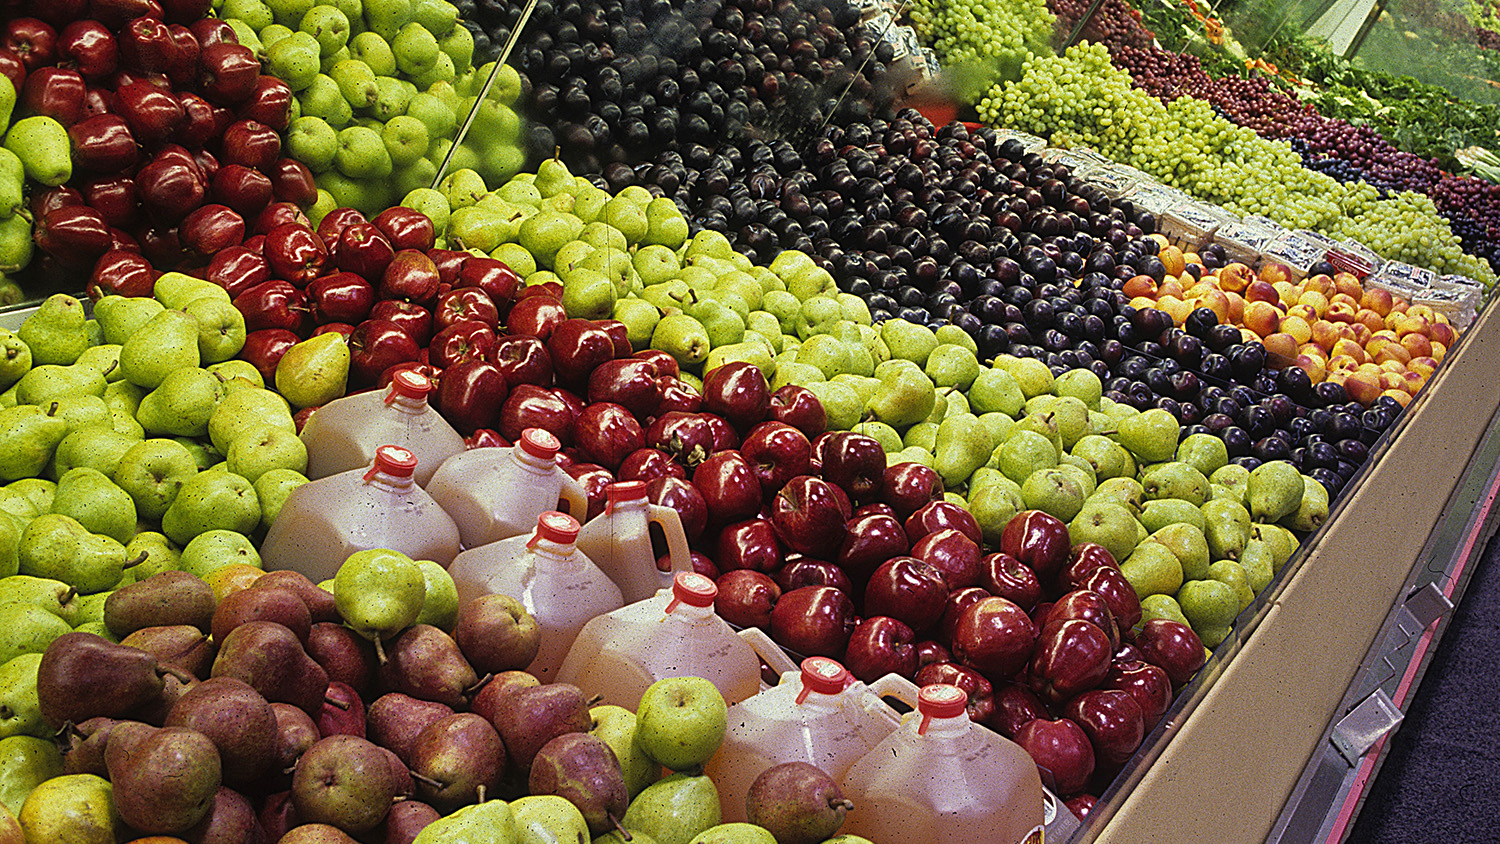 Grocery store produce section with appleas, cider, plums and more.